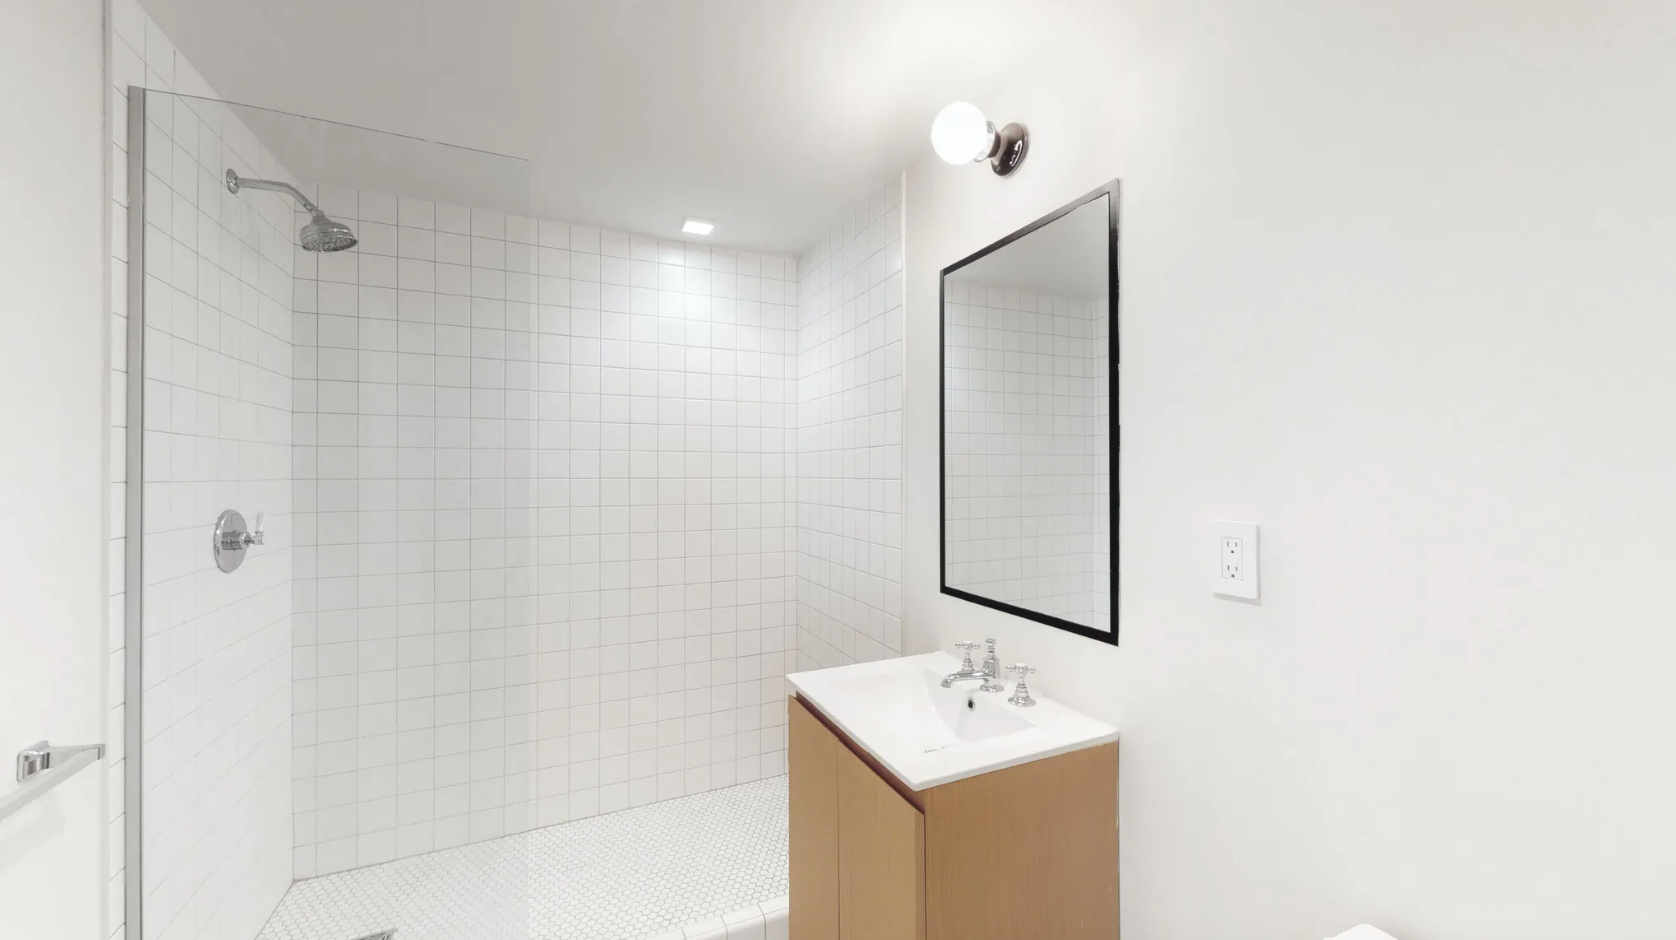 The bathroom has a single vanity with sconce lighting and a combination shower-bathtub.